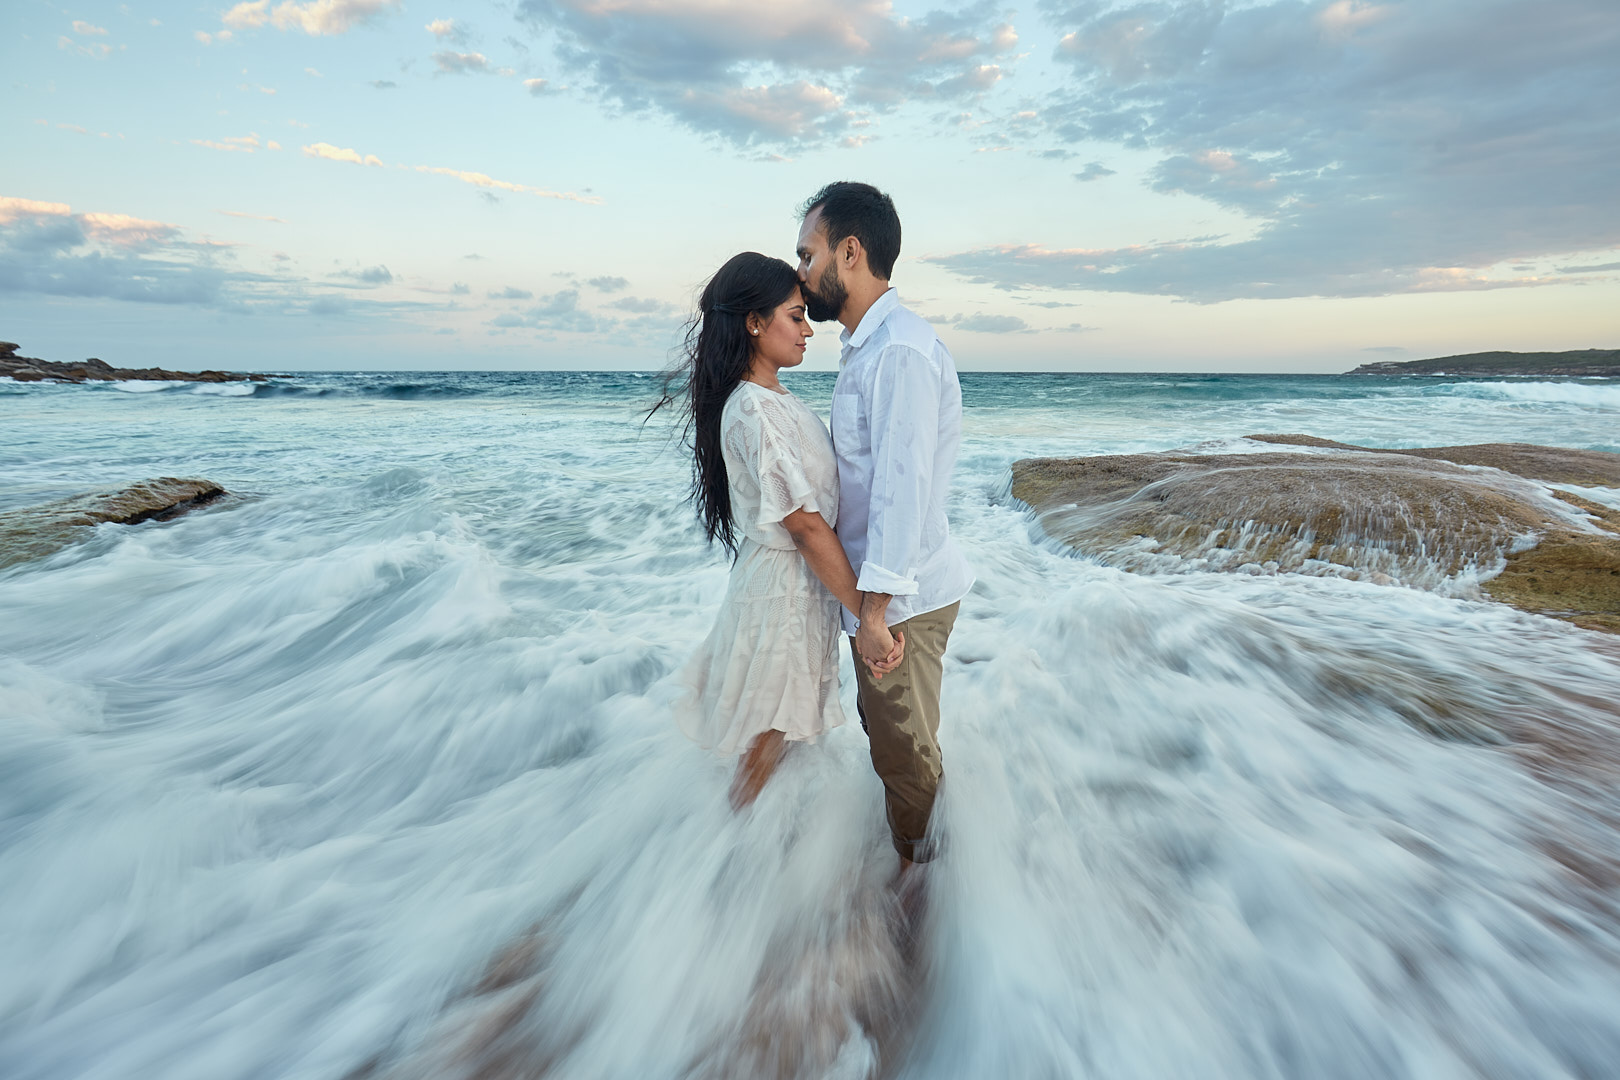 Fun pre-wedding photoshoot ideas for you - Blushed Rose